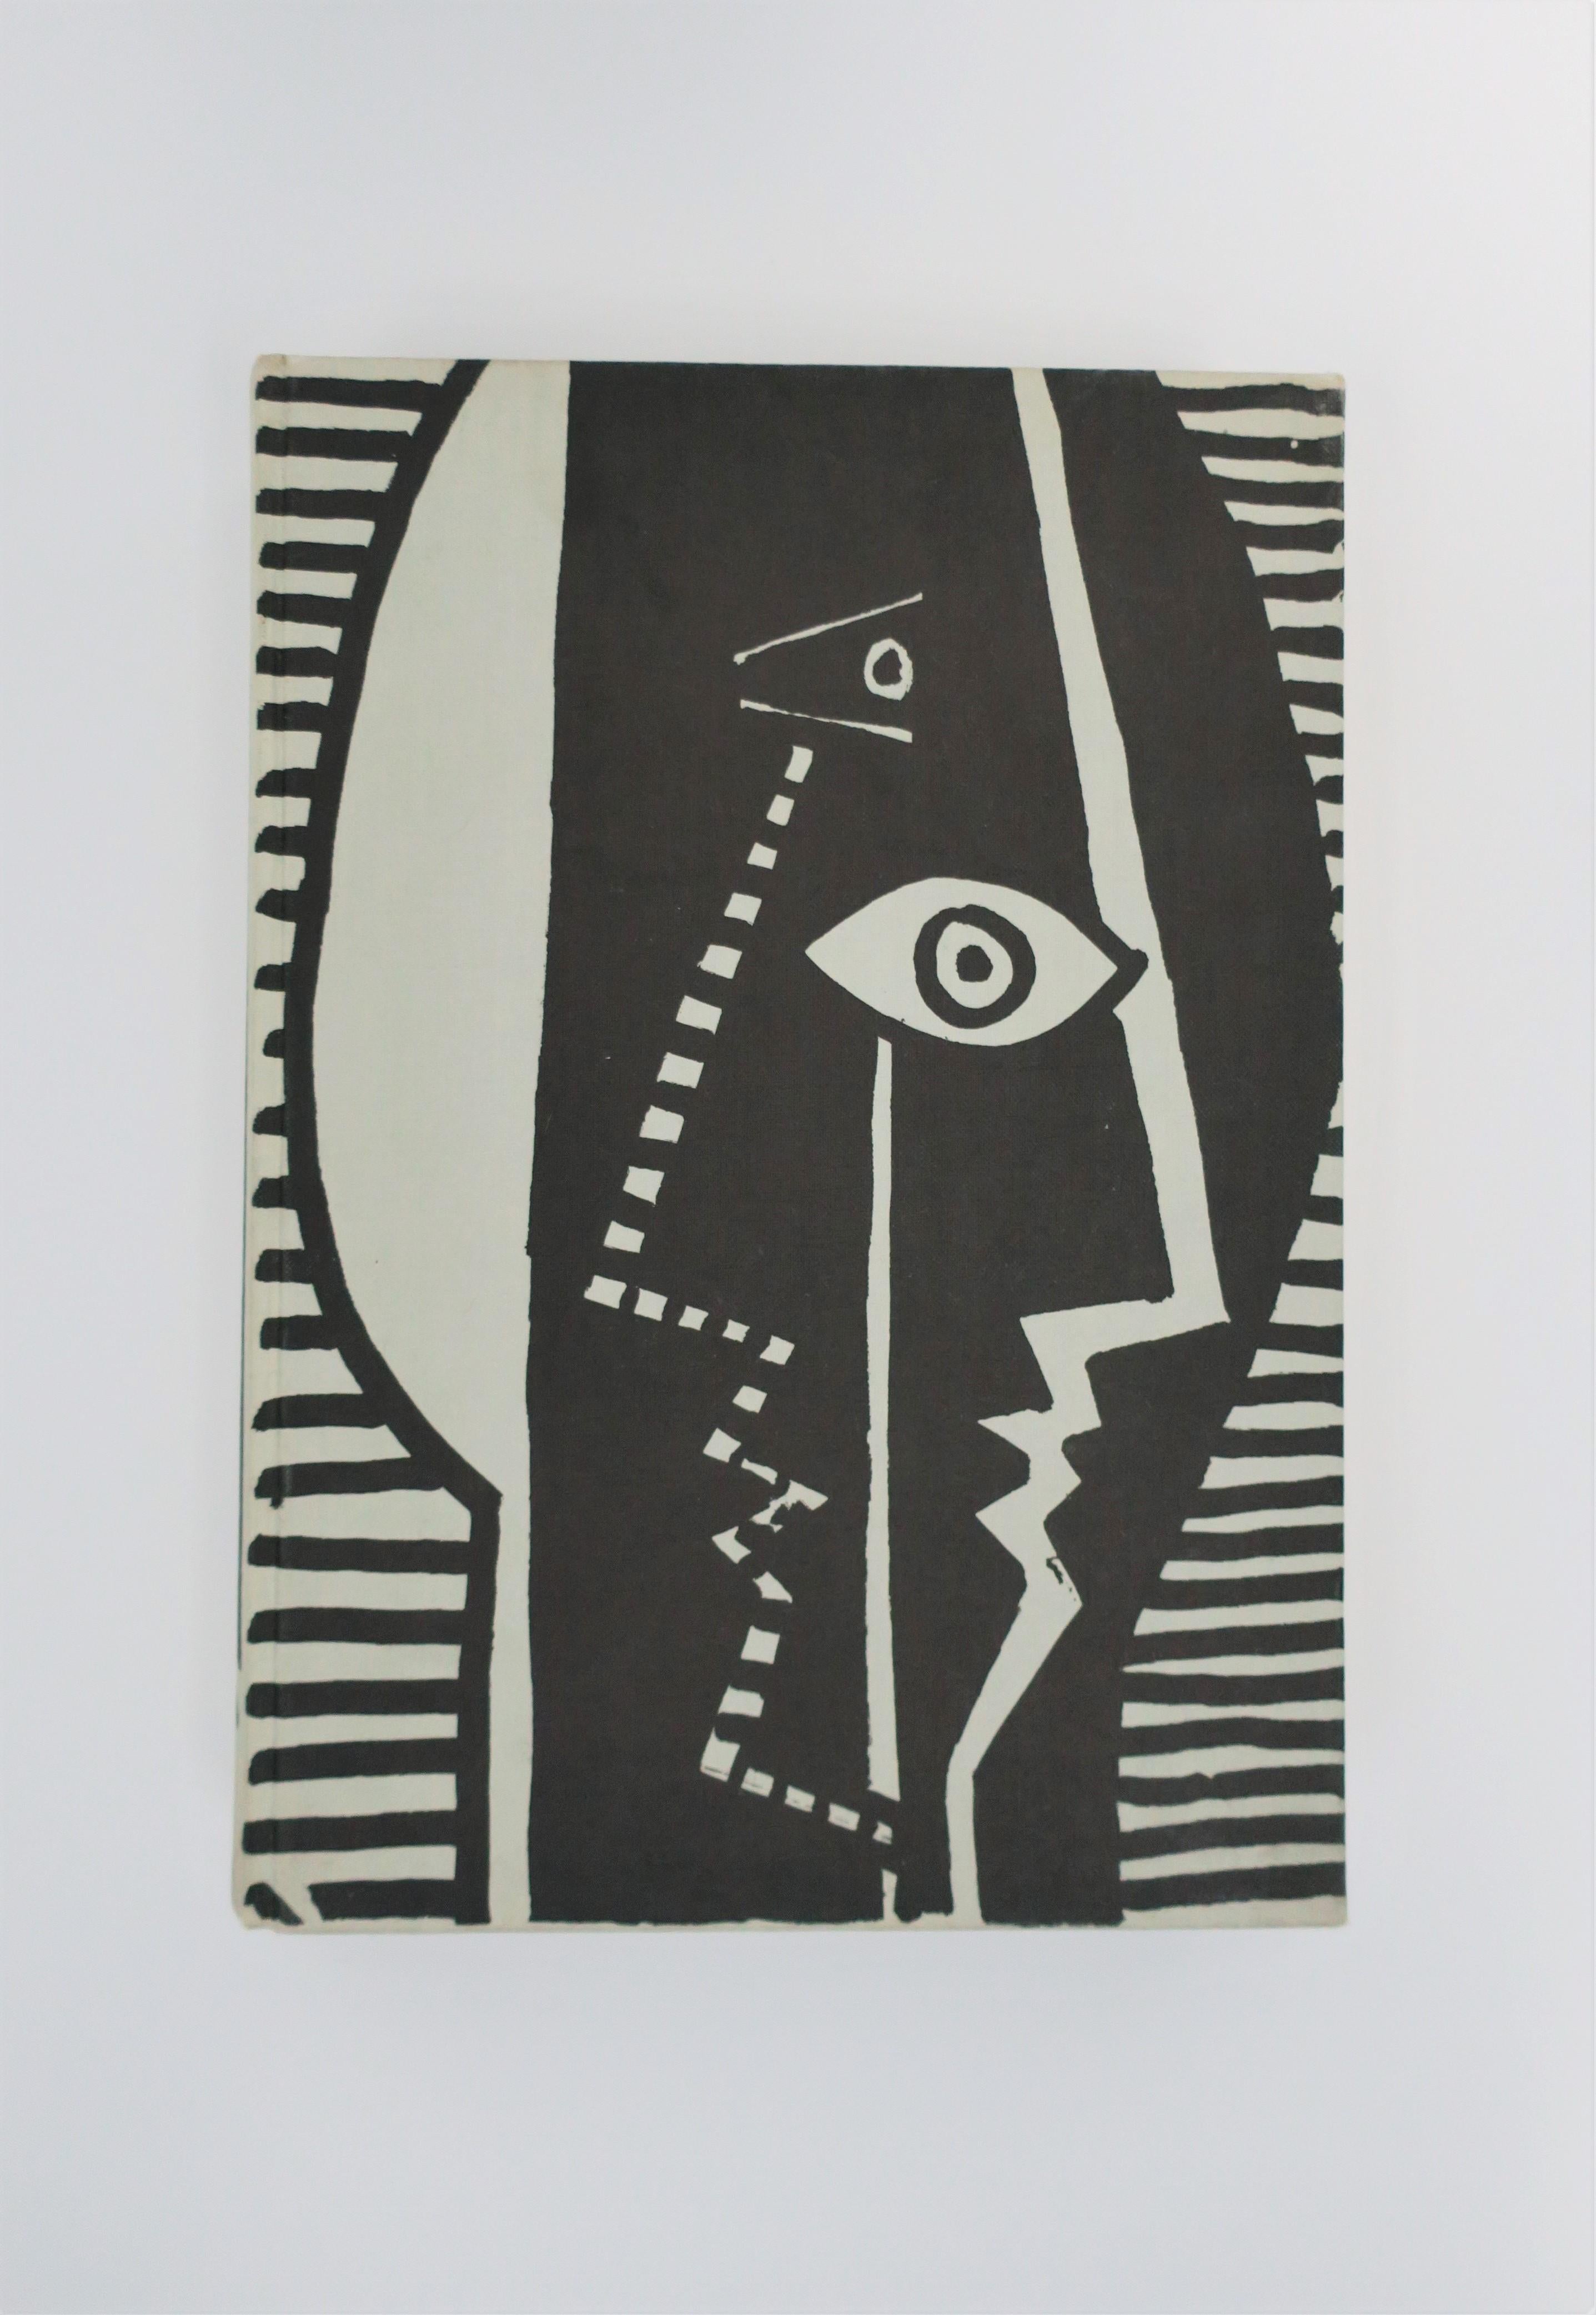 Picasso, a library or coffee table book, 1955, First Edition, Germany. 
The cover design was made especially for this book by Pablo Picasso, July 1955. 

